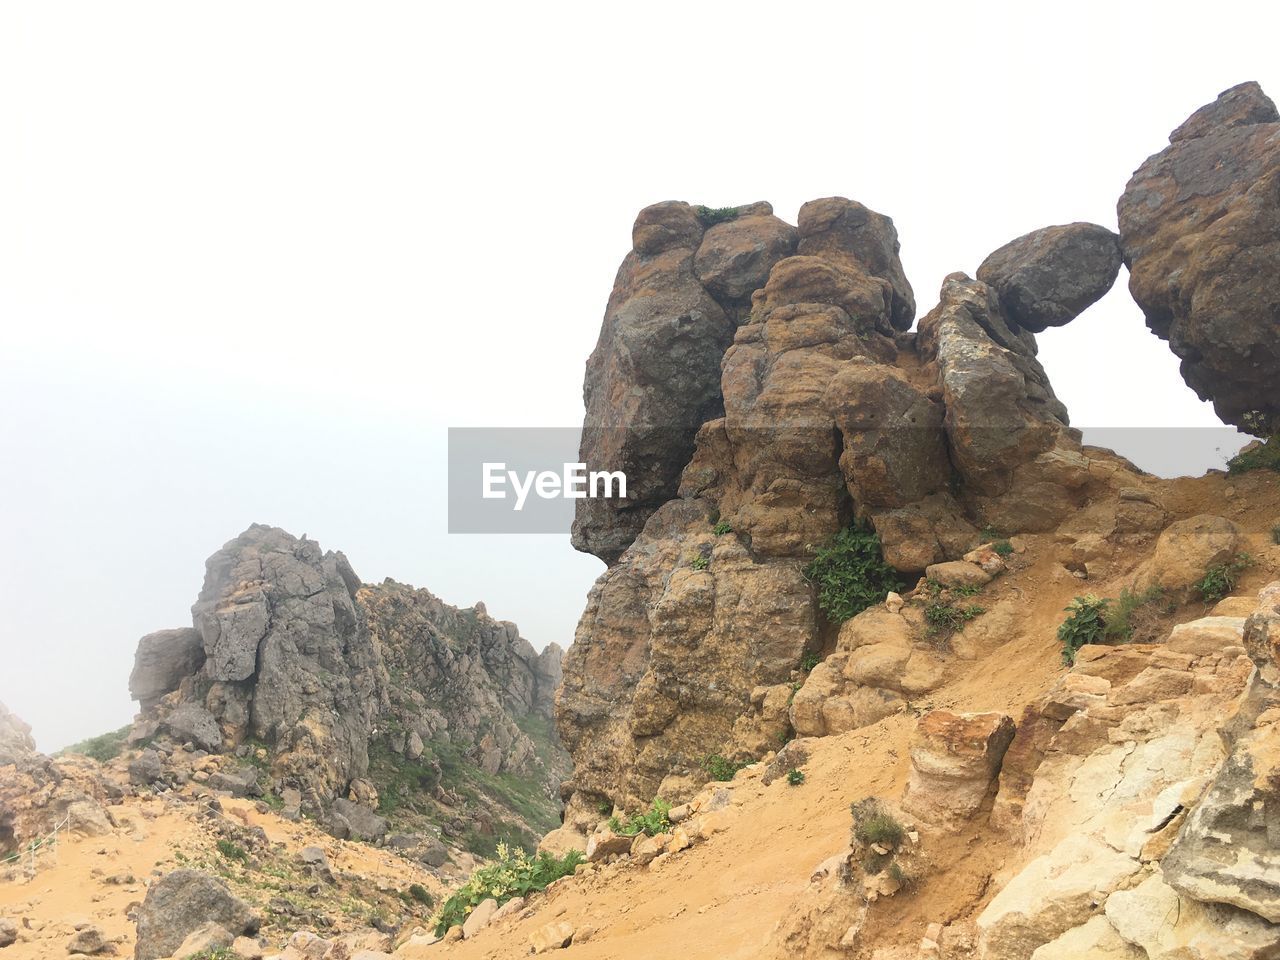 SCENIC VIEW OF ROCK FORMATIONS